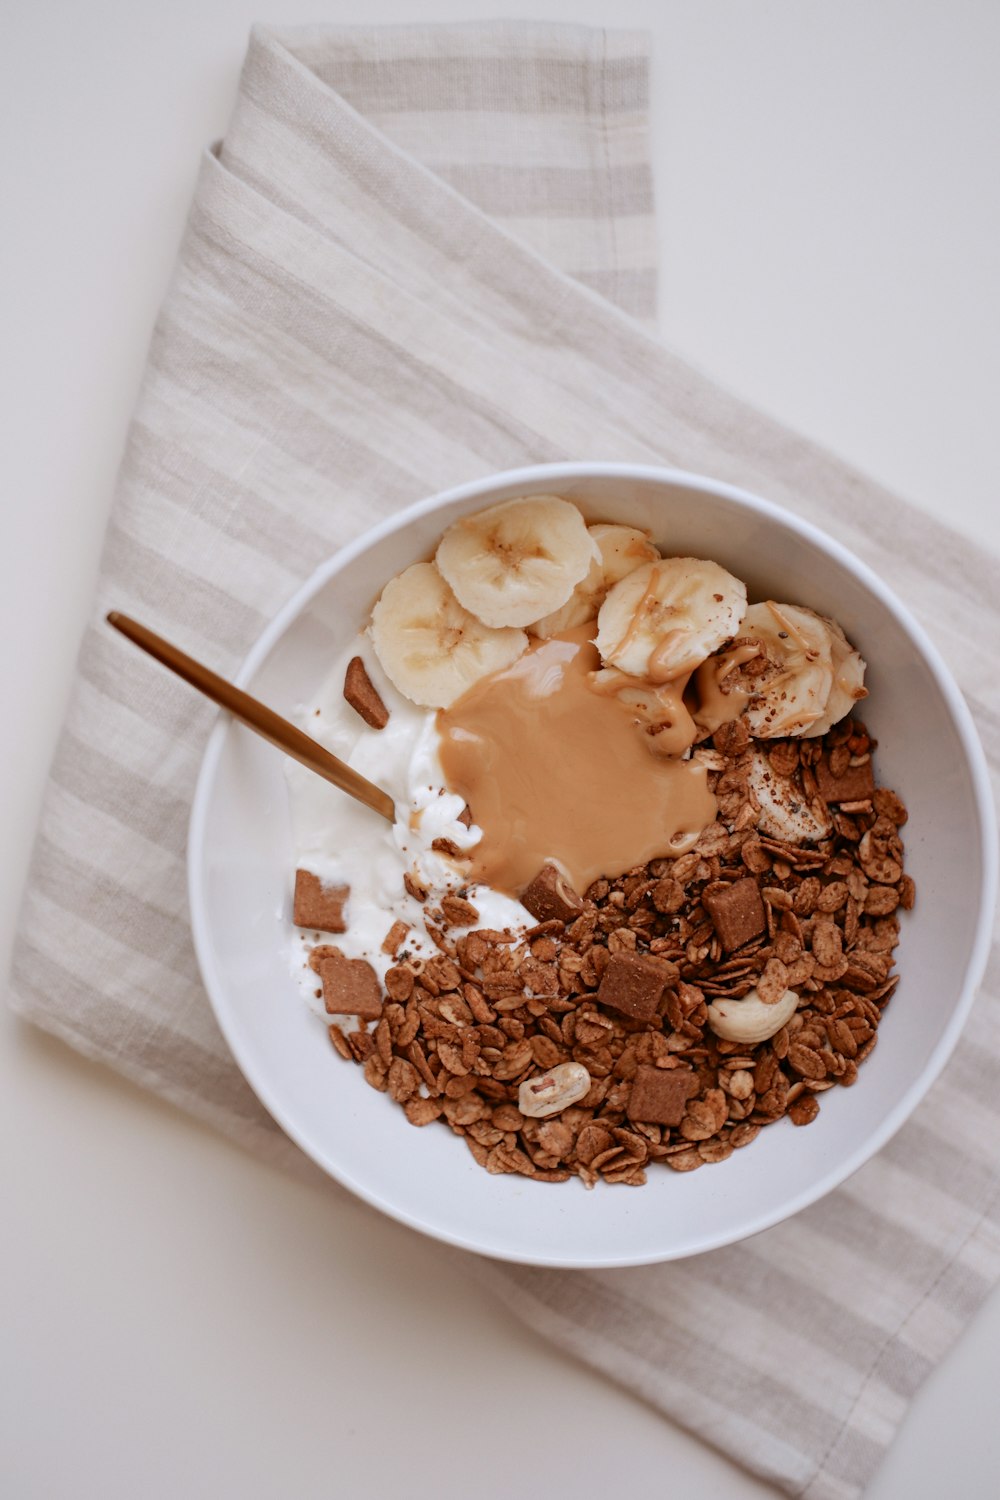 a bowl of cereal with chocolate and bananas